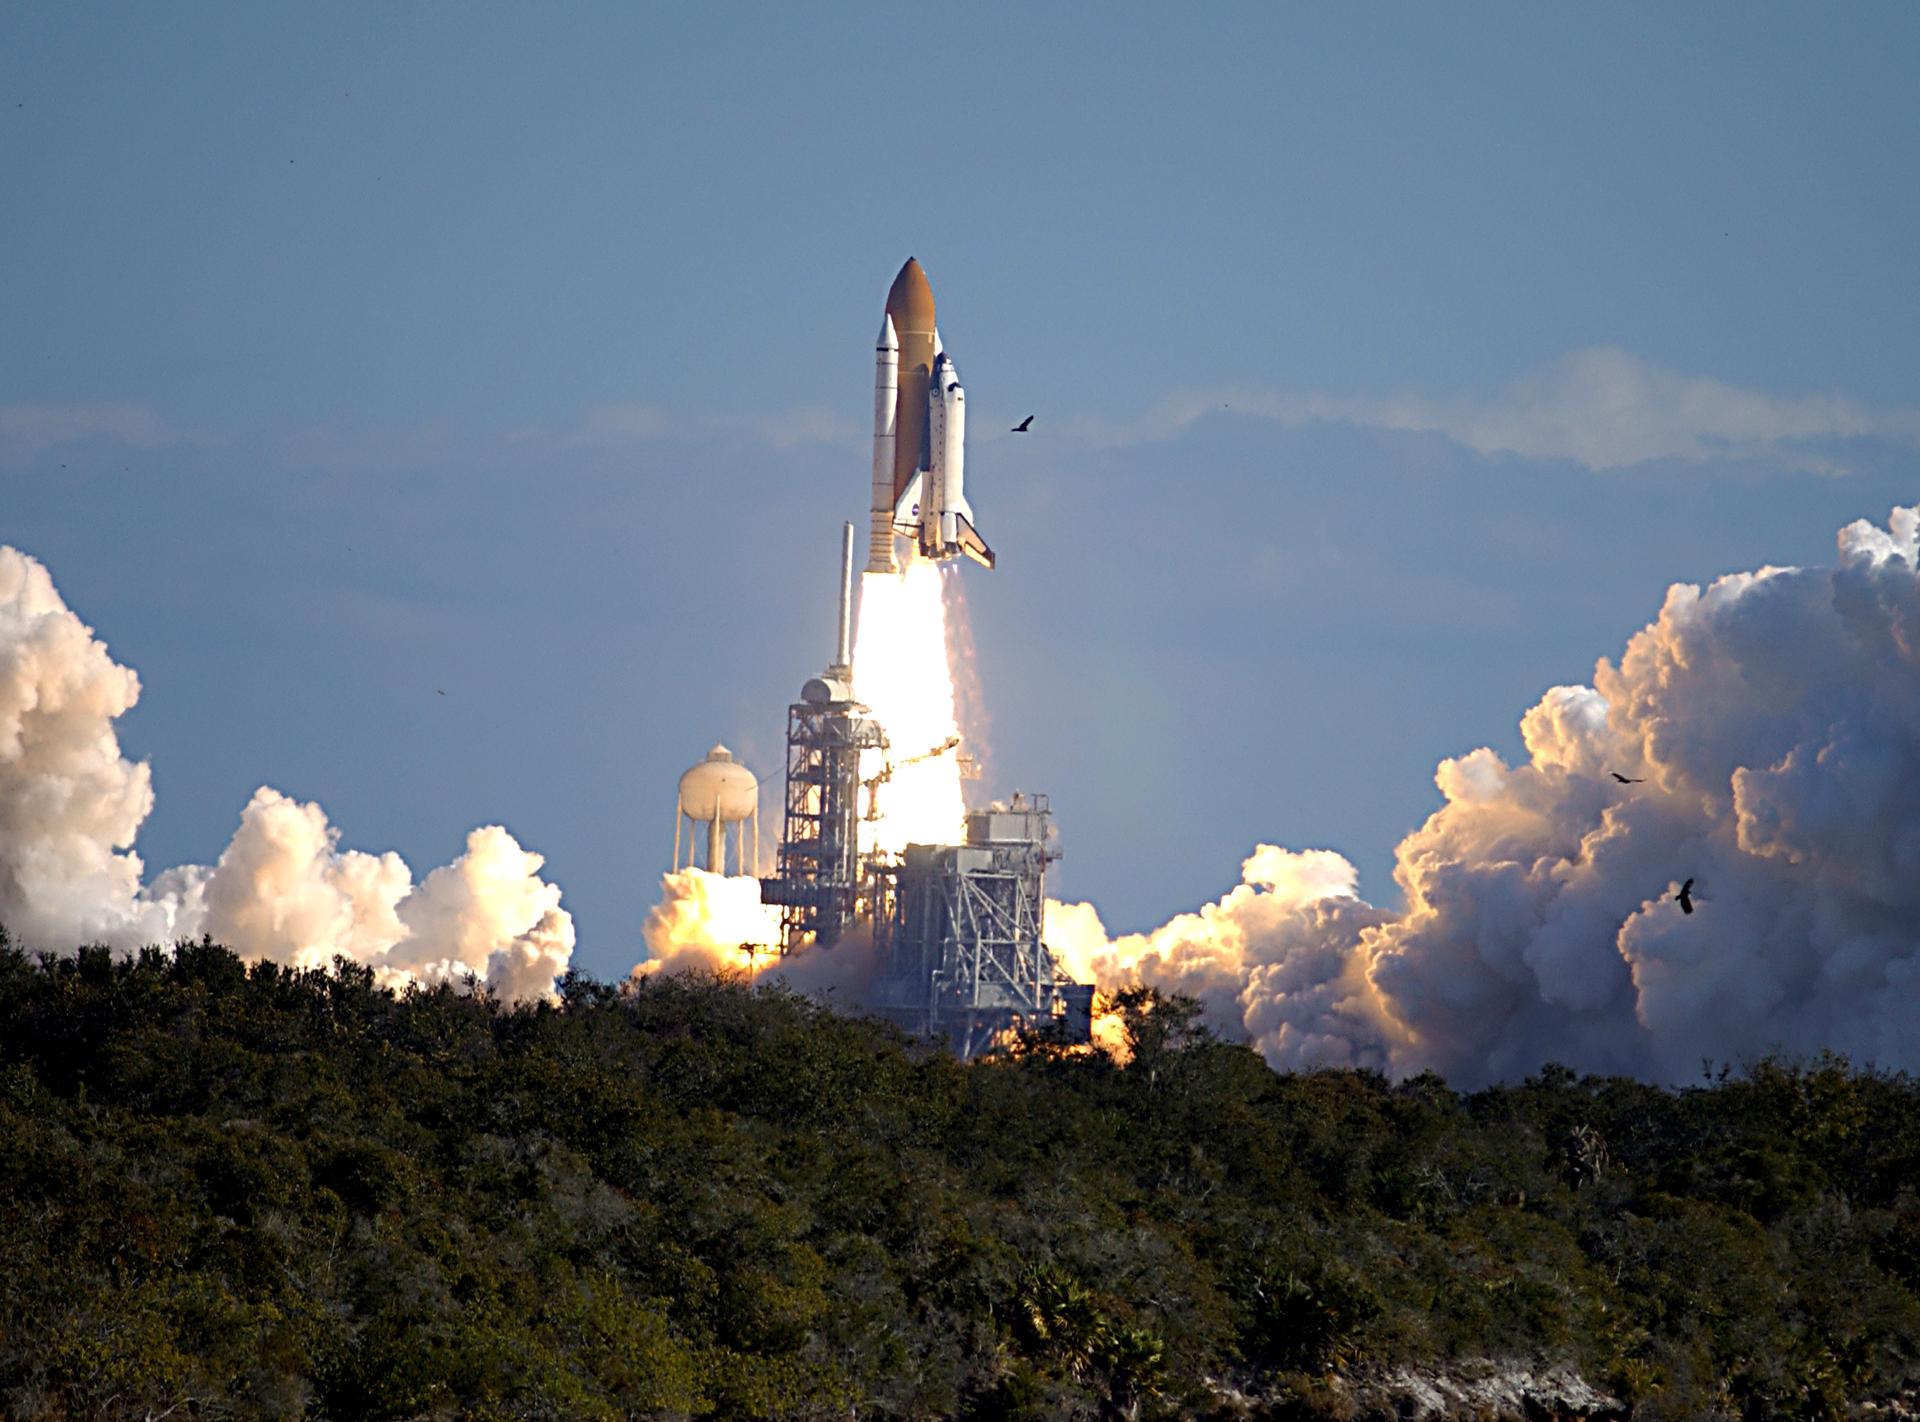 Space Shuttle Columbia lists off on its last mission, January 16, 2003. (Source: NASA)